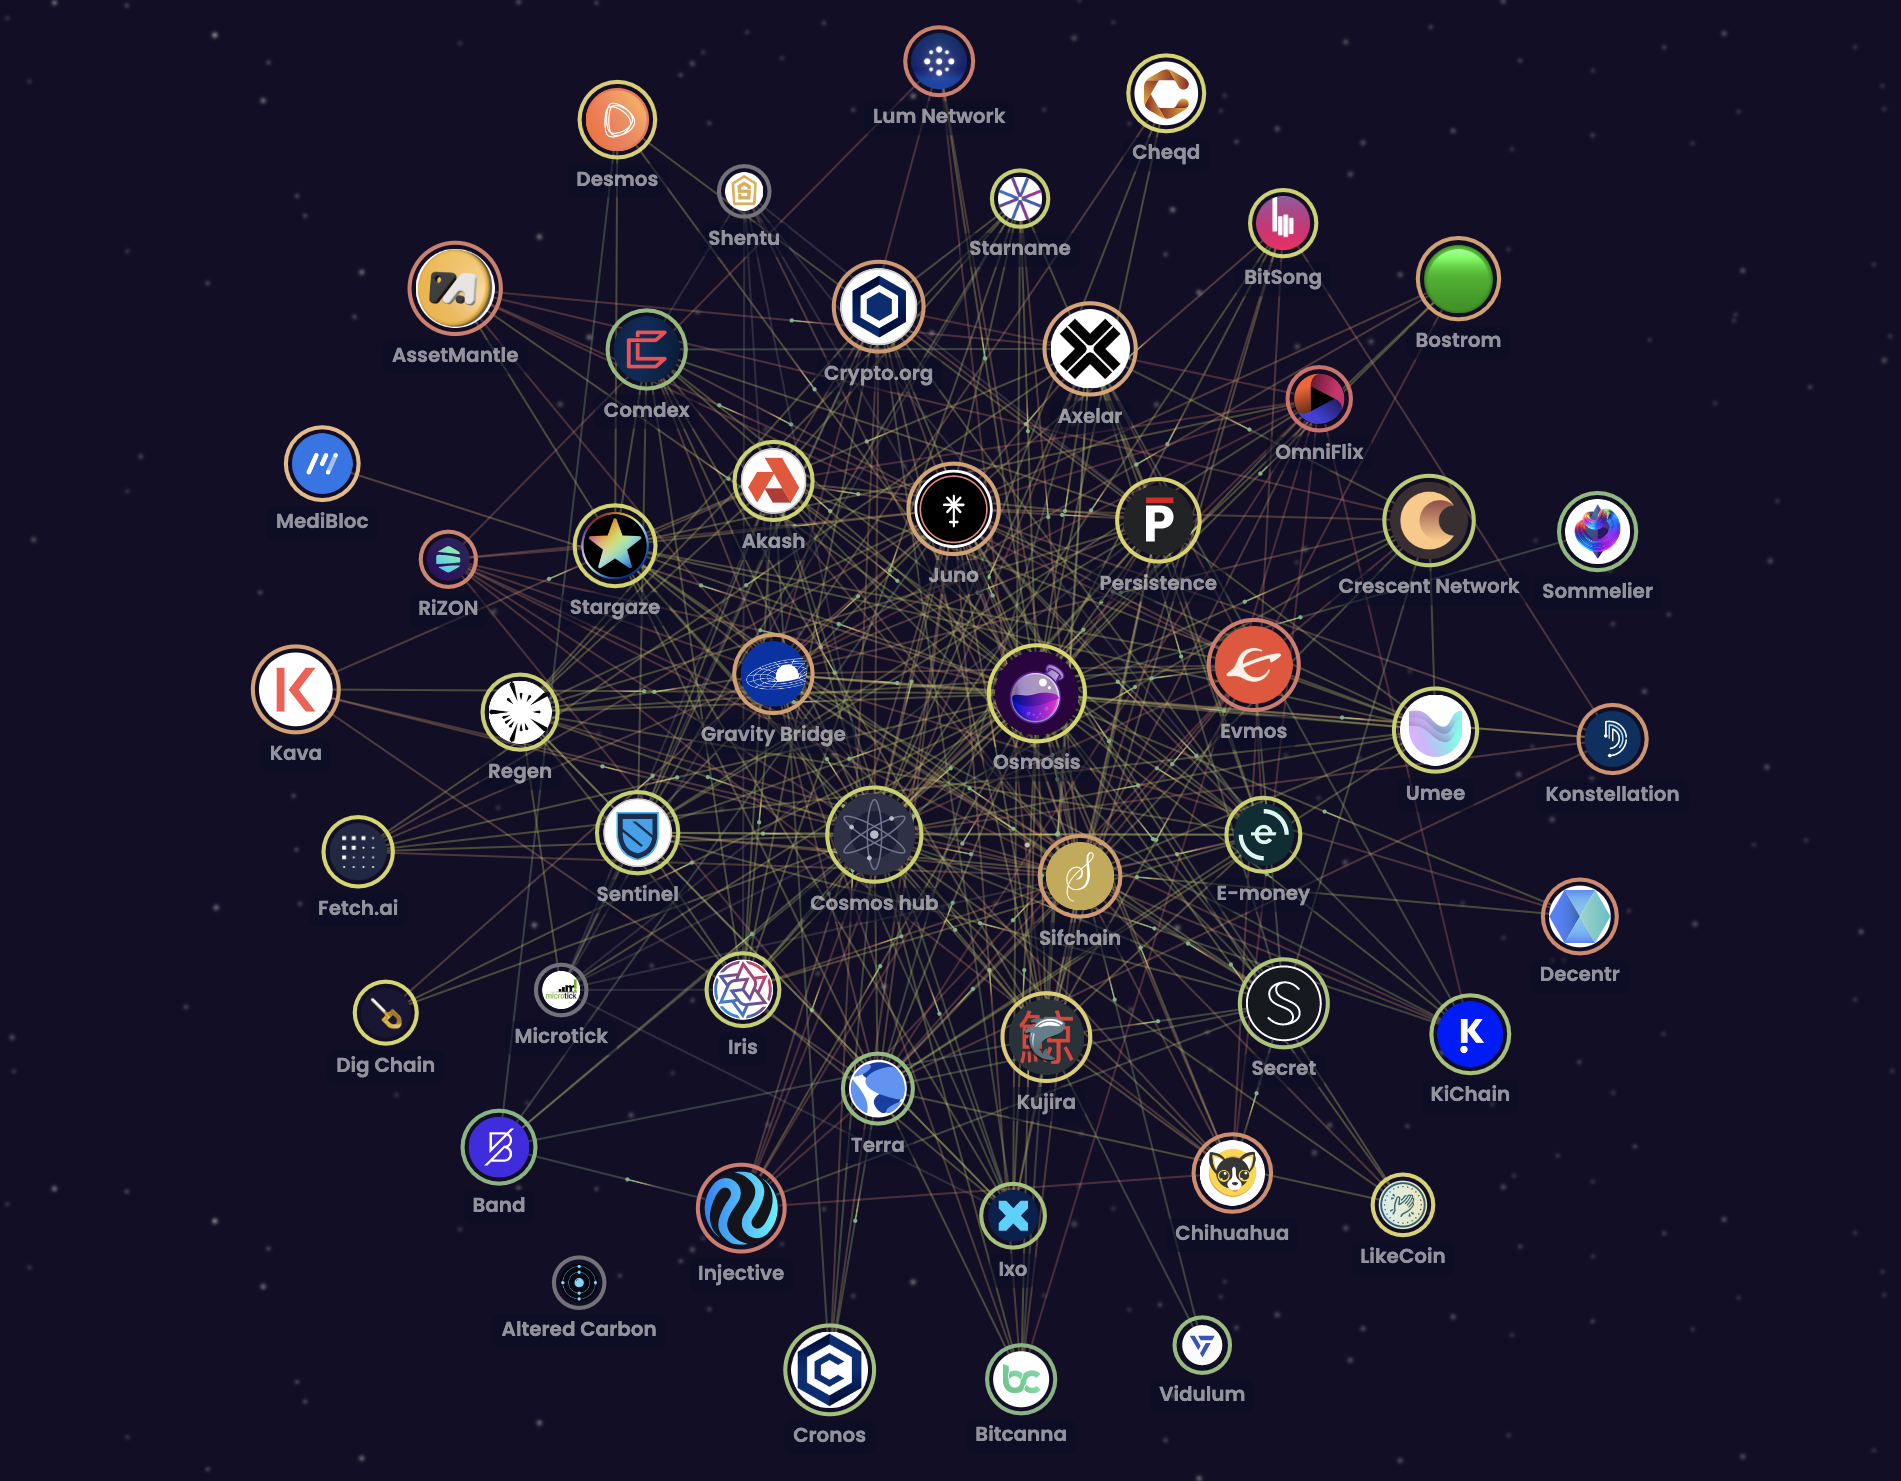 Imagine this whole ecosystem of blockchains interconnected at the application layer (SOURCE: mapofzones.com)